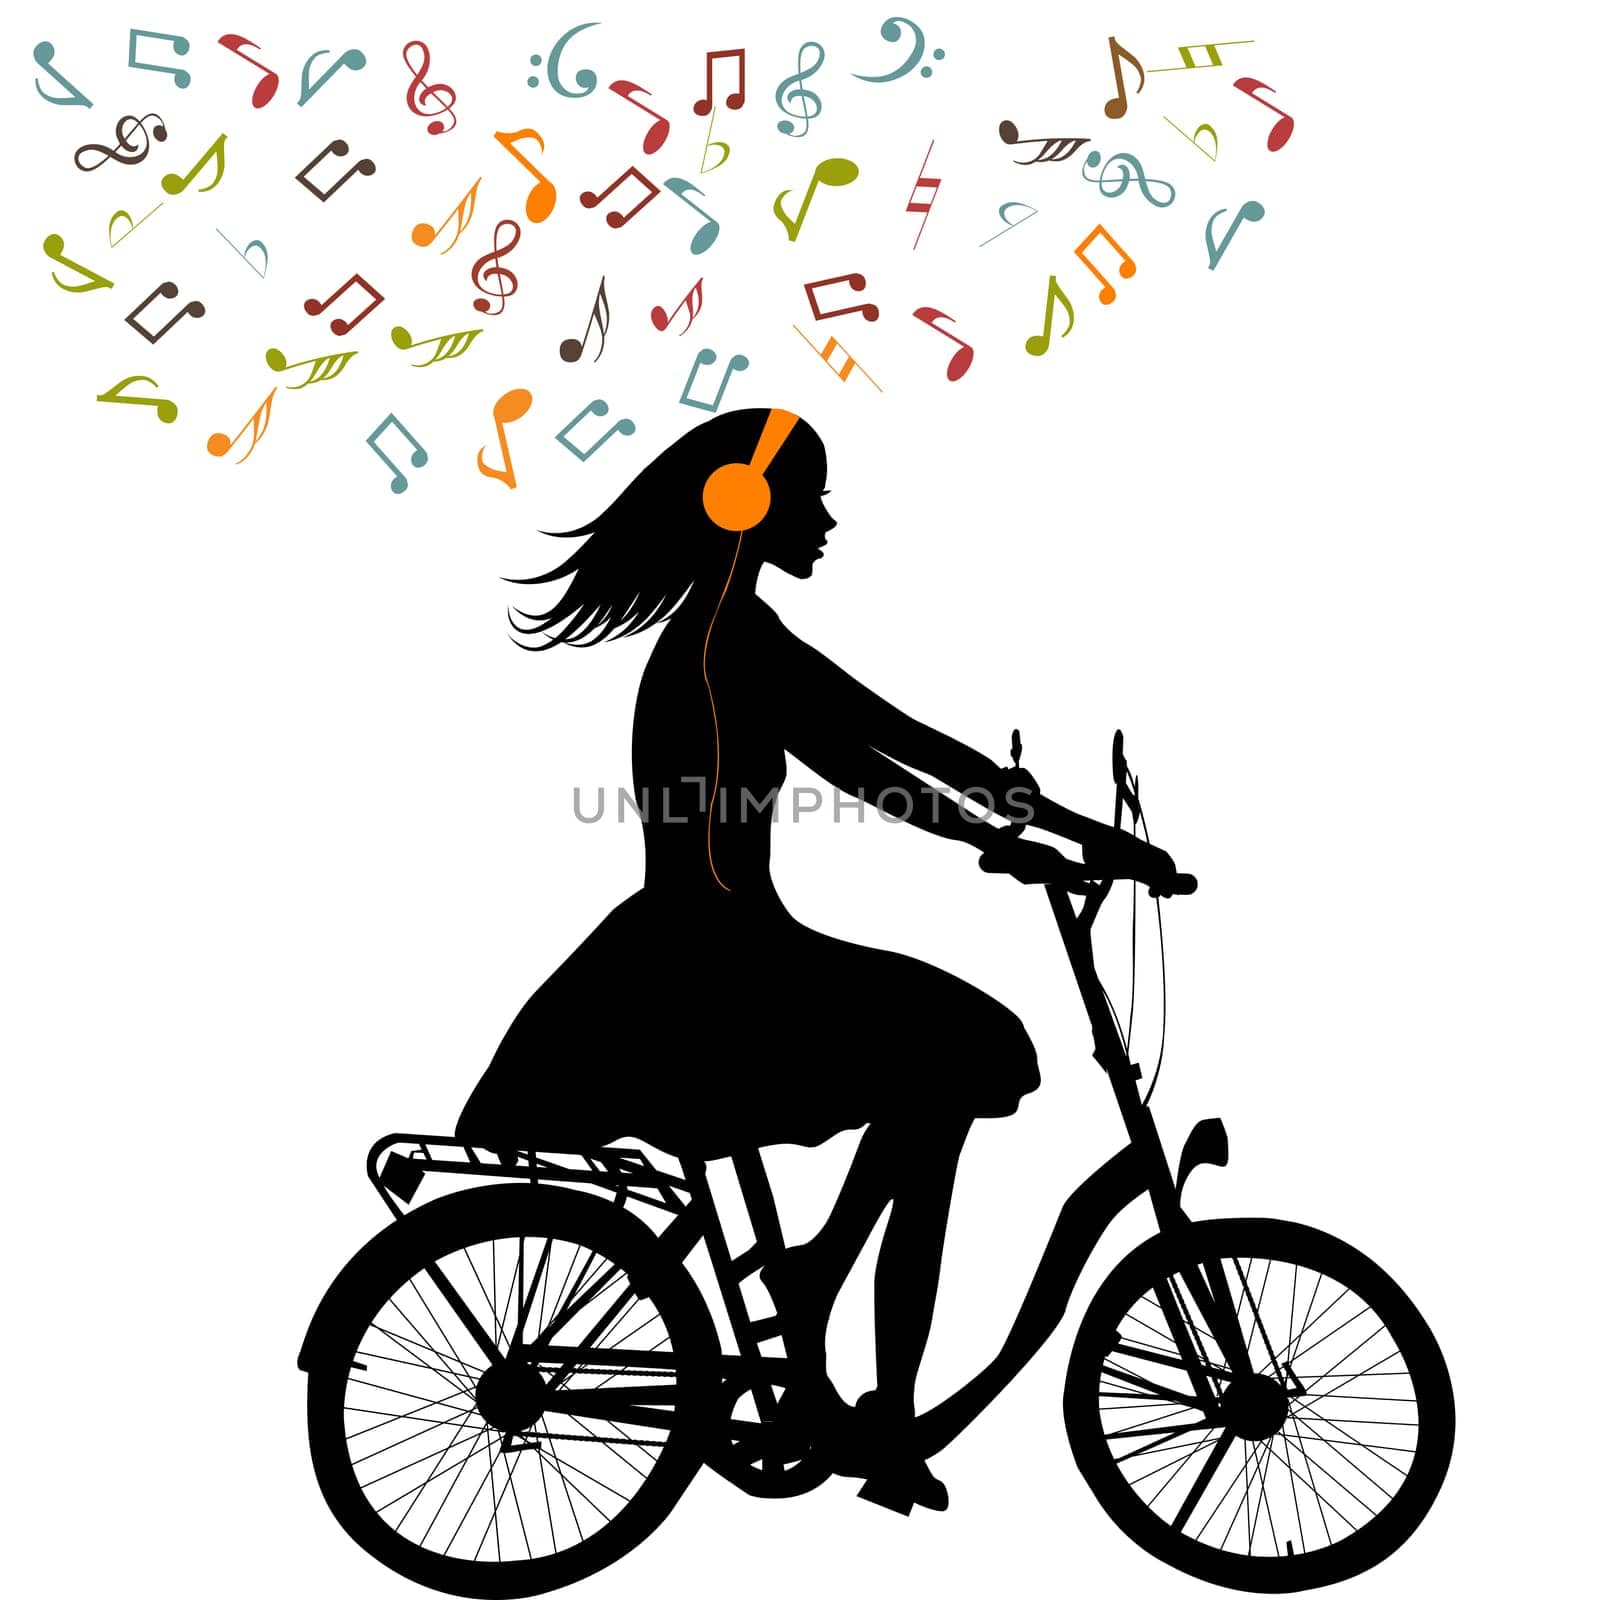 Stylized woman riding a bicycle and listening to music in headphones by hibrida13